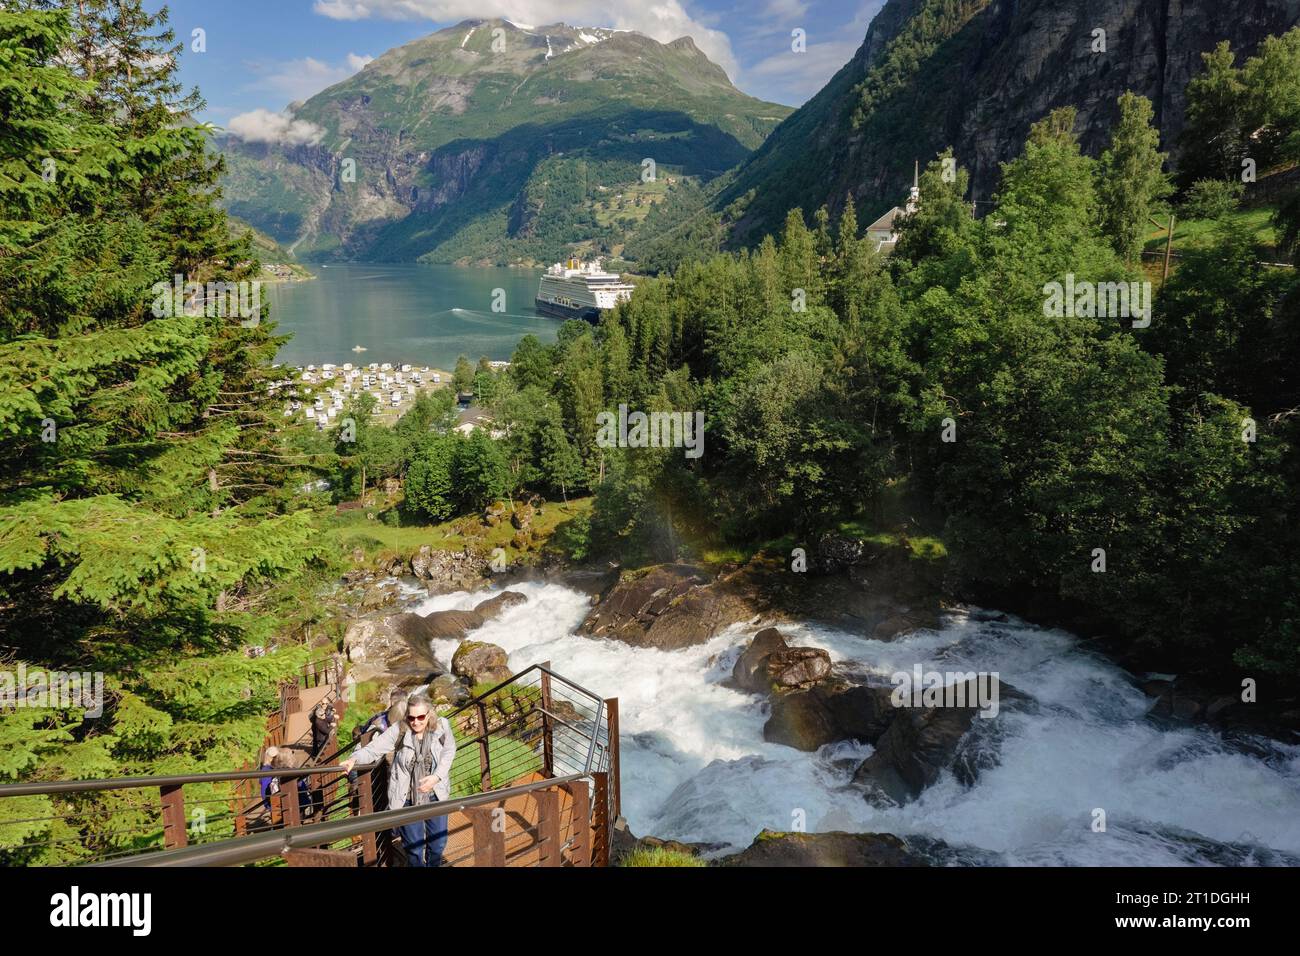 Walkway on the waterfall trail with view to fjord below. Geiranger, Møre og Romsdal, Norway, Scandinavia, Europe Stock Photo